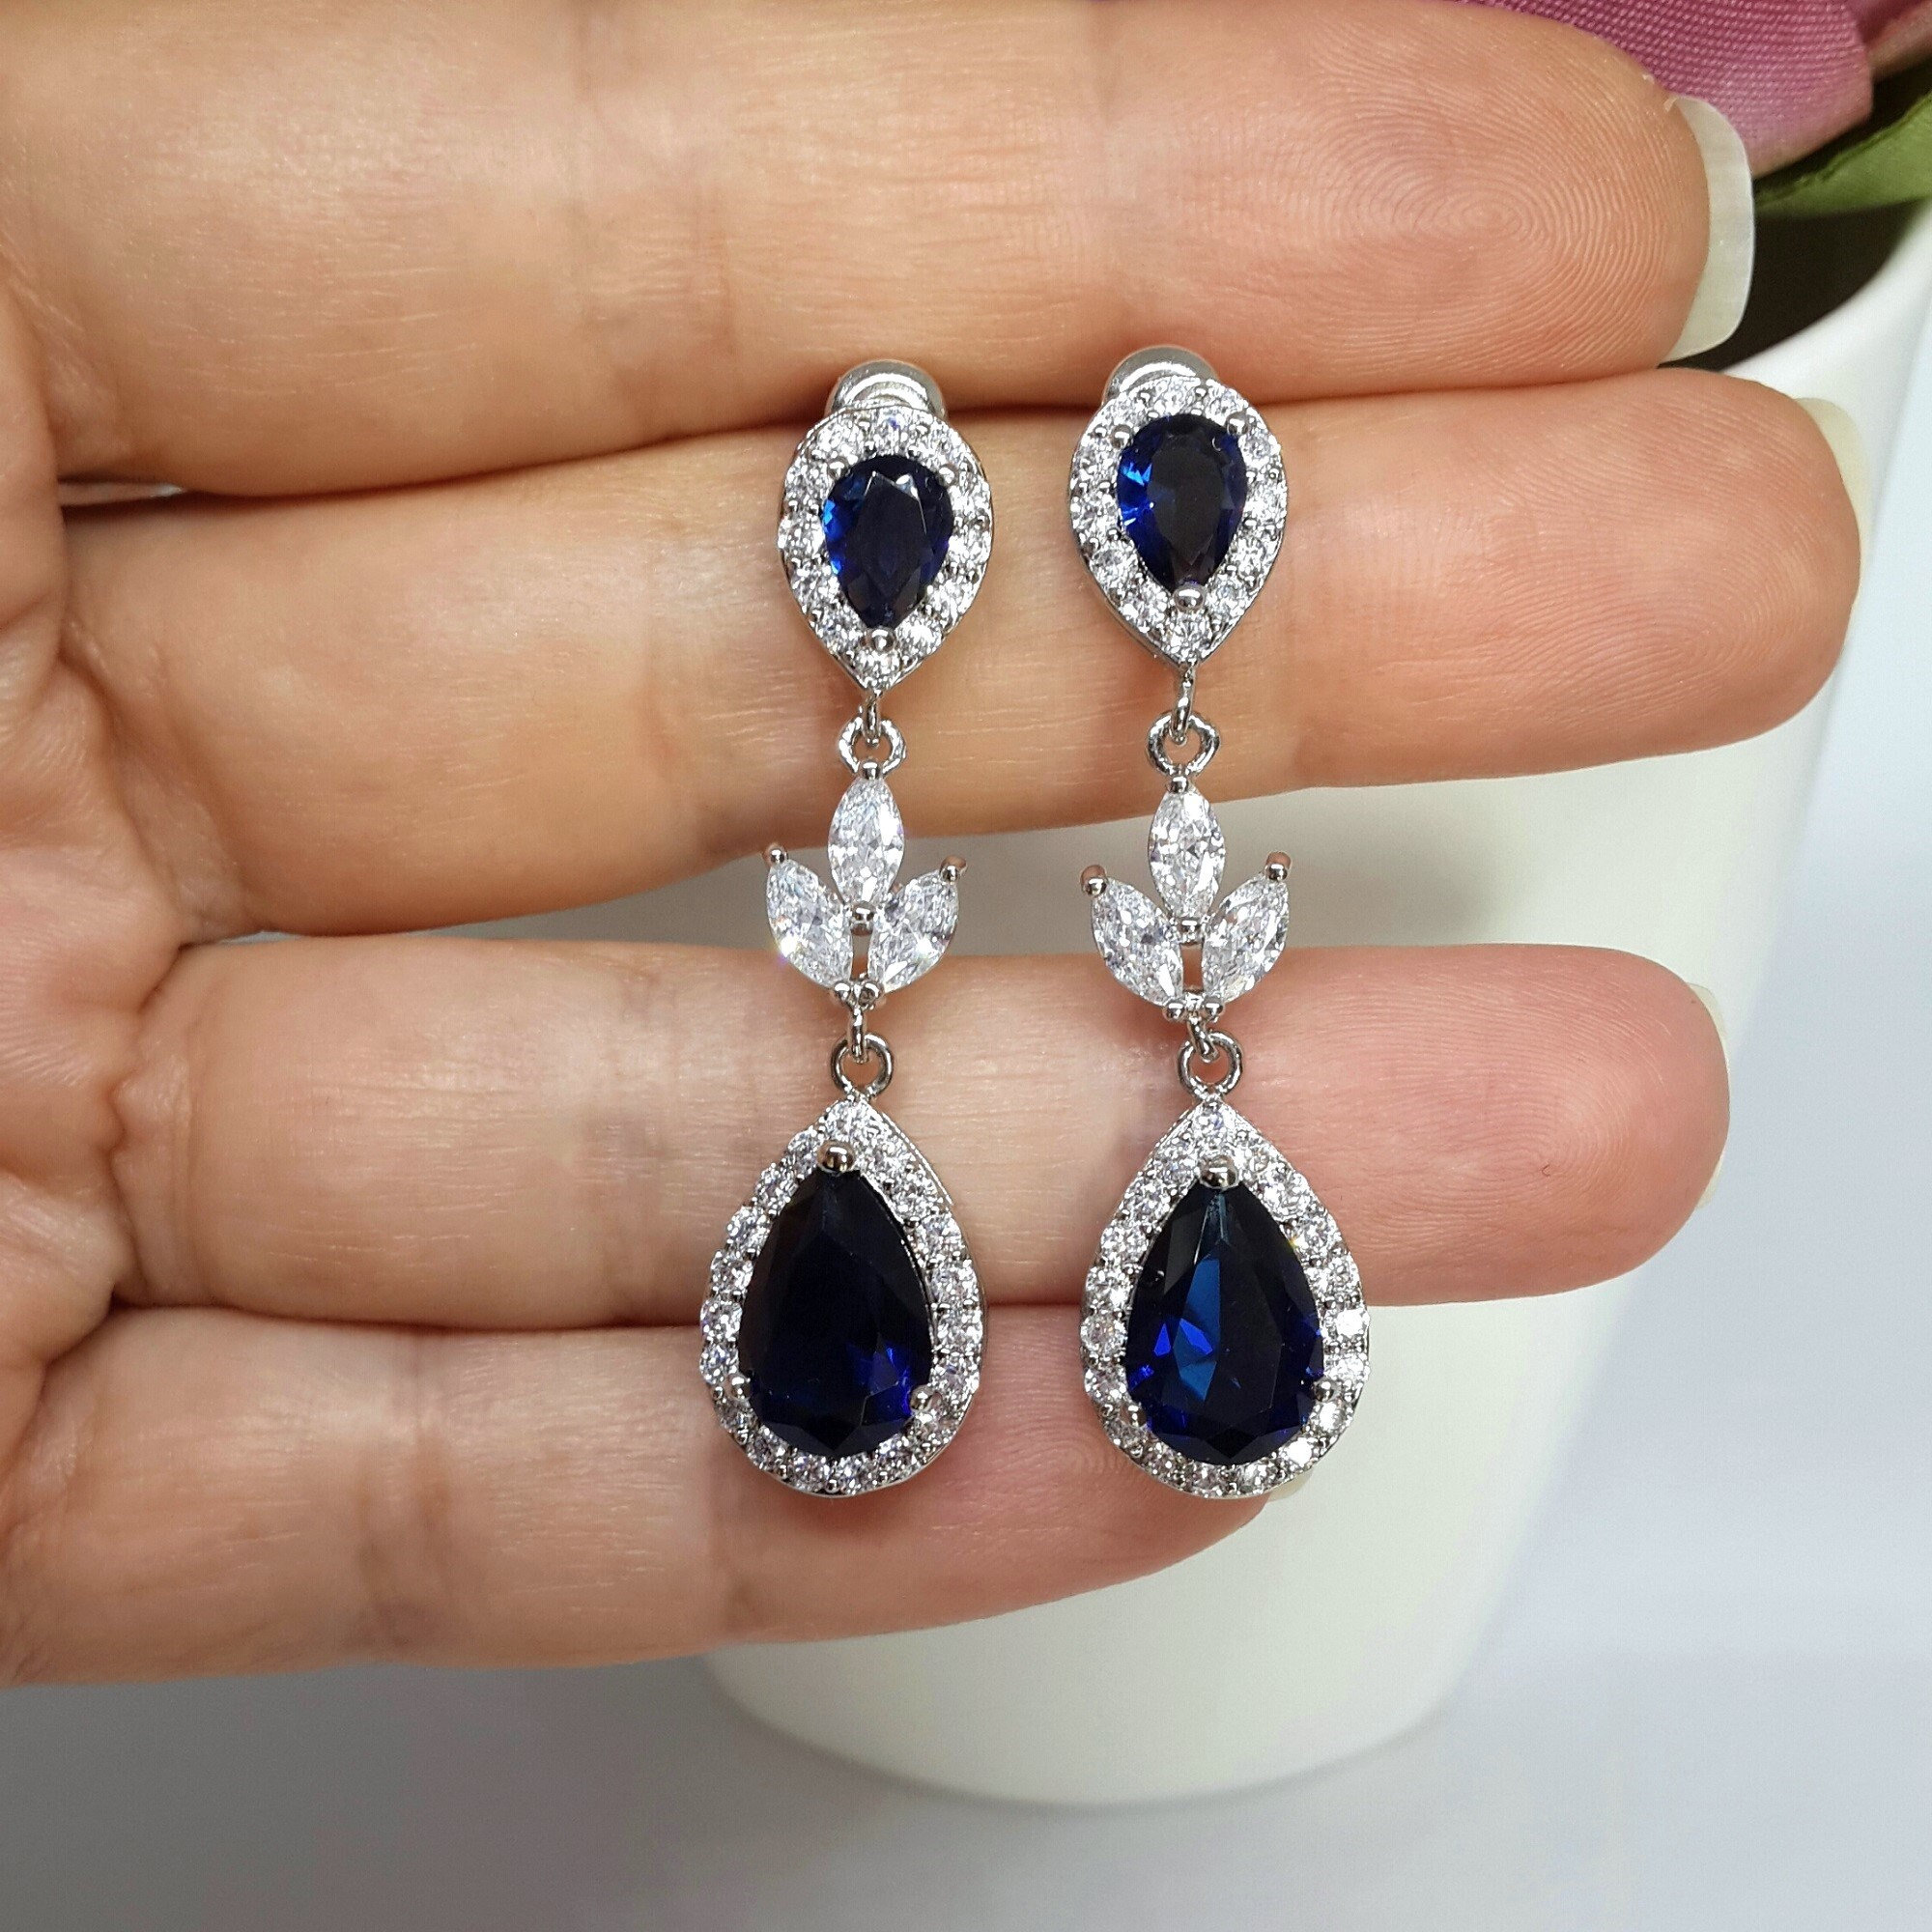 Details more than 79 sapphire wedding earrings latest